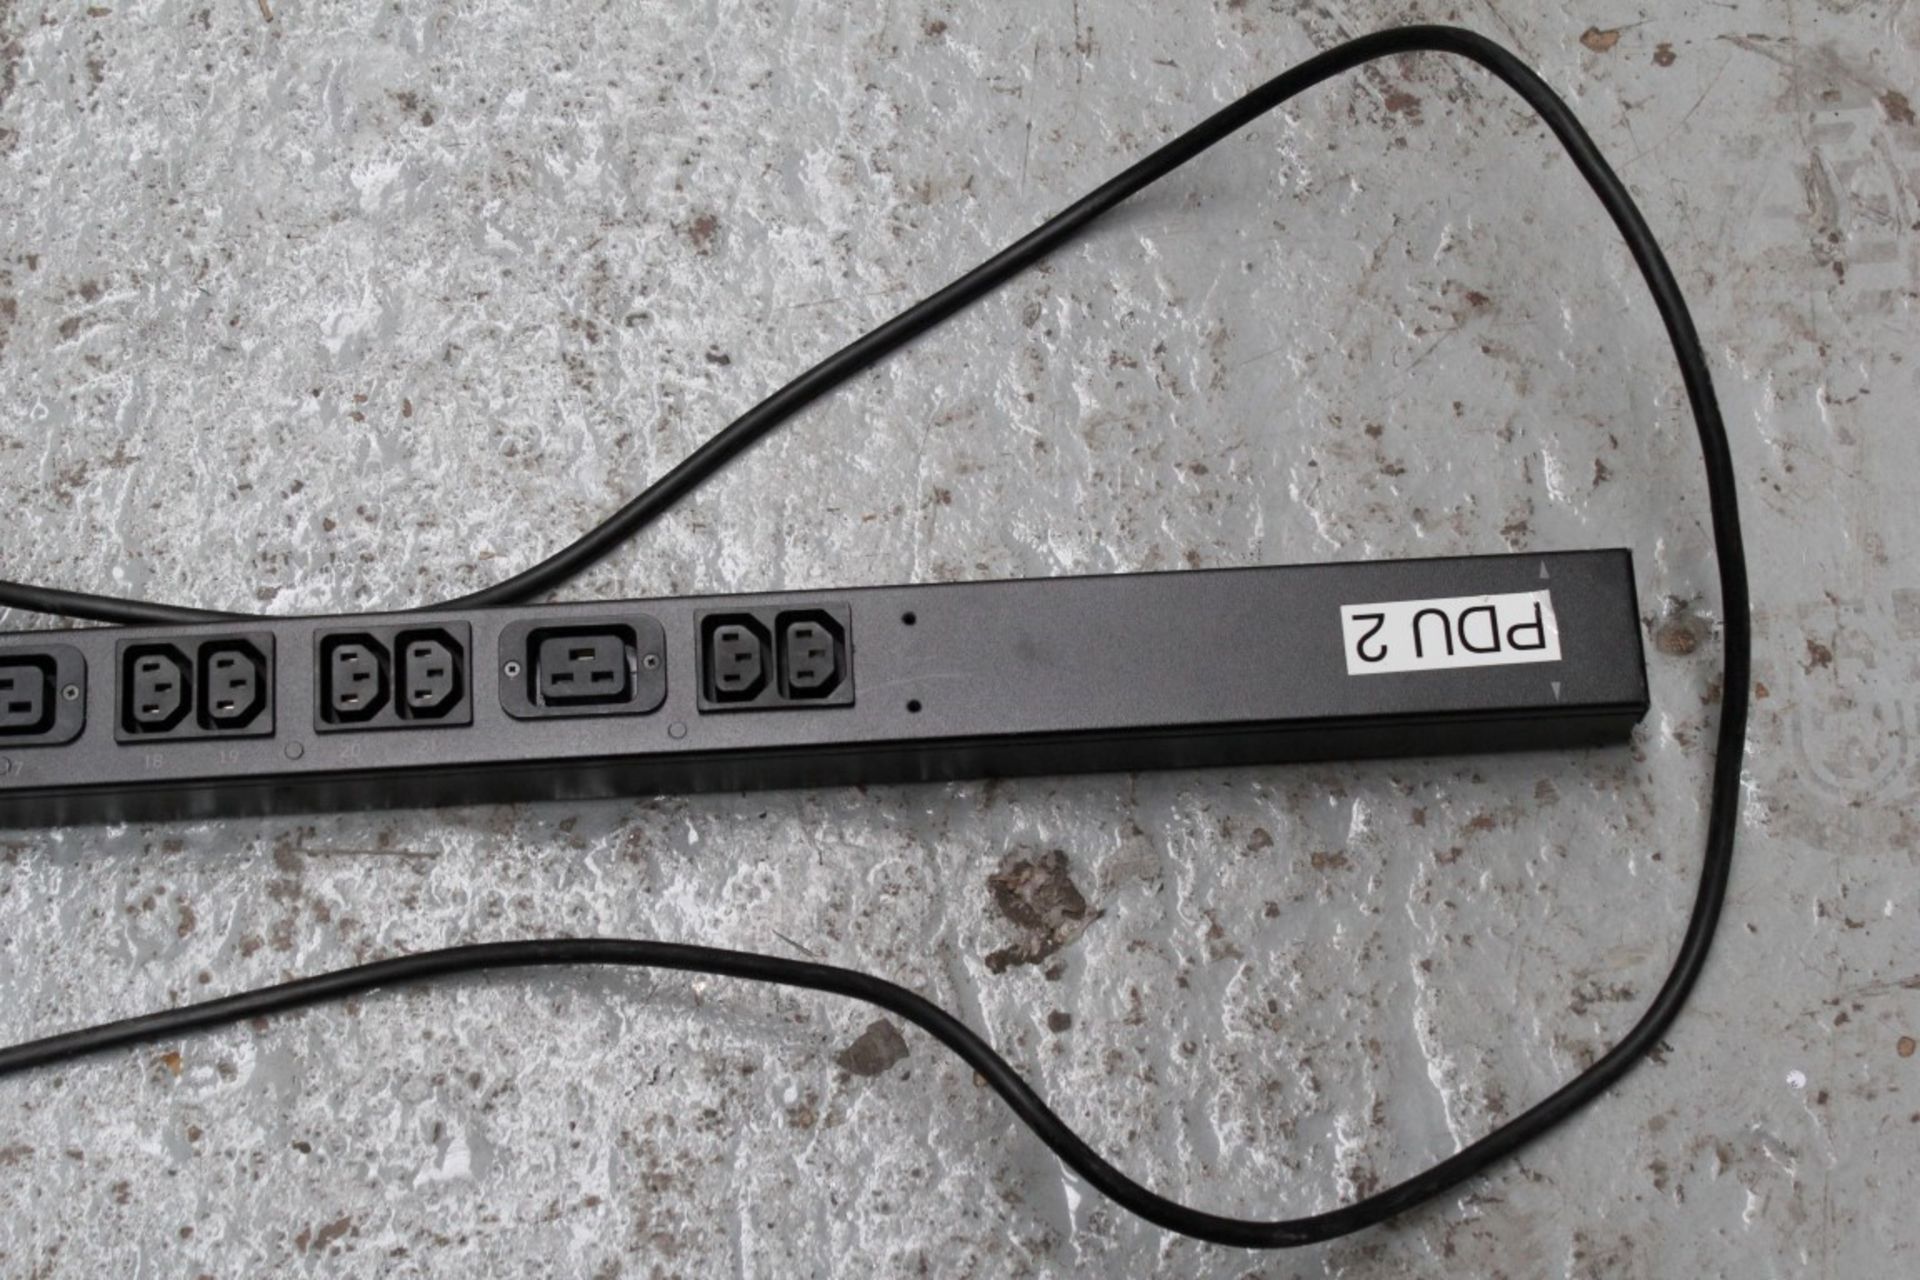 1 x APC Metered Rack PDU - Model AP7852 - 230V 16A - Features 24 Output Connectors - CL106 - Removed - Image 4 of 4